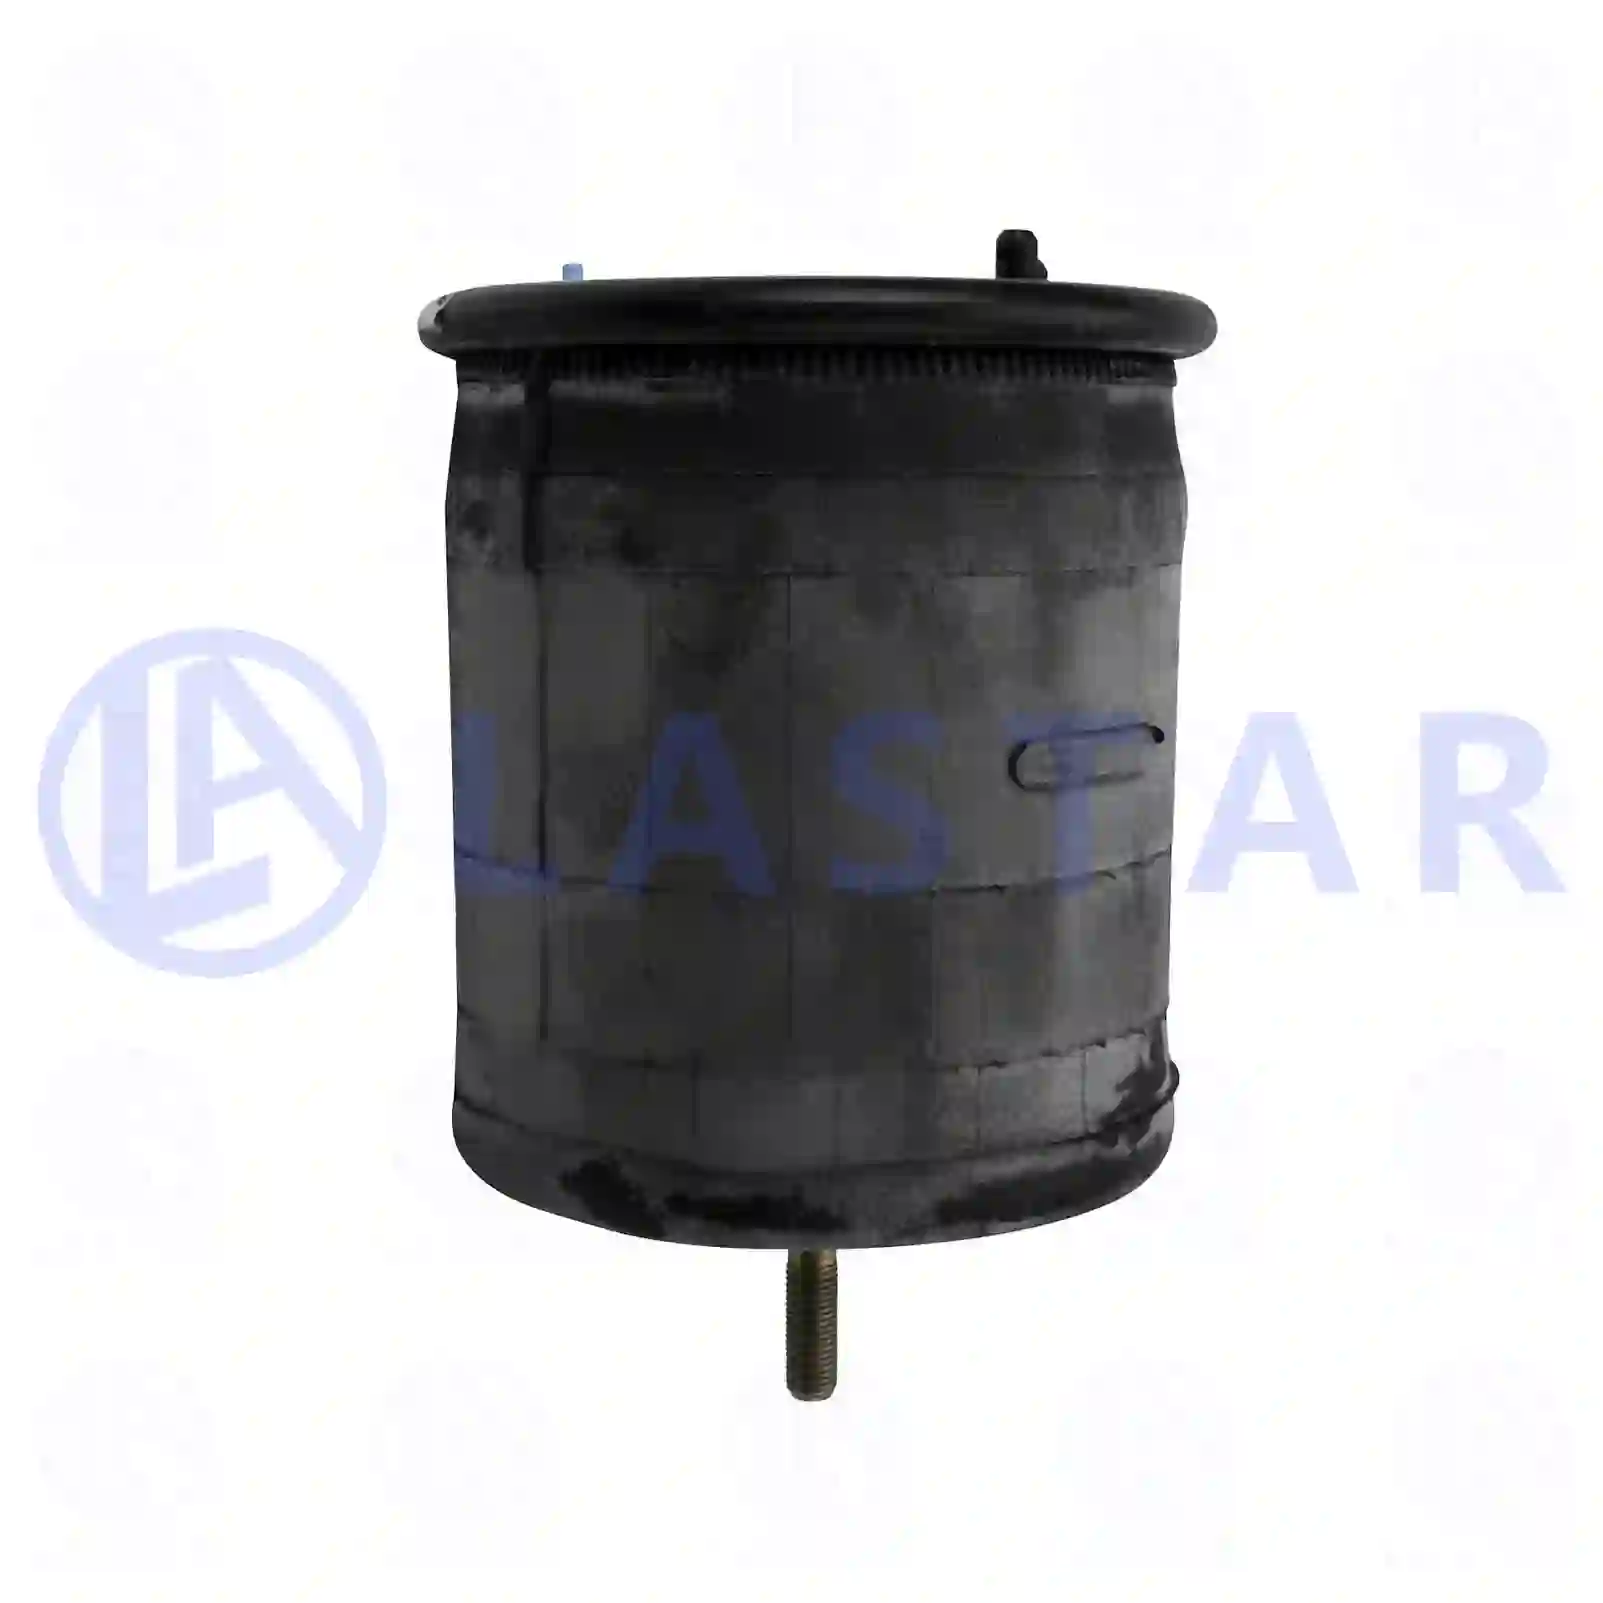 Air spring, with plastic piston, 77730134, 1434930, 1932592, ||  77730134 Lastar Spare Part | Truck Spare Parts, Auotomotive Spare Parts Air spring, with plastic piston, 77730134, 1434930, 1932592, ||  77730134 Lastar Spare Part | Truck Spare Parts, Auotomotive Spare Parts